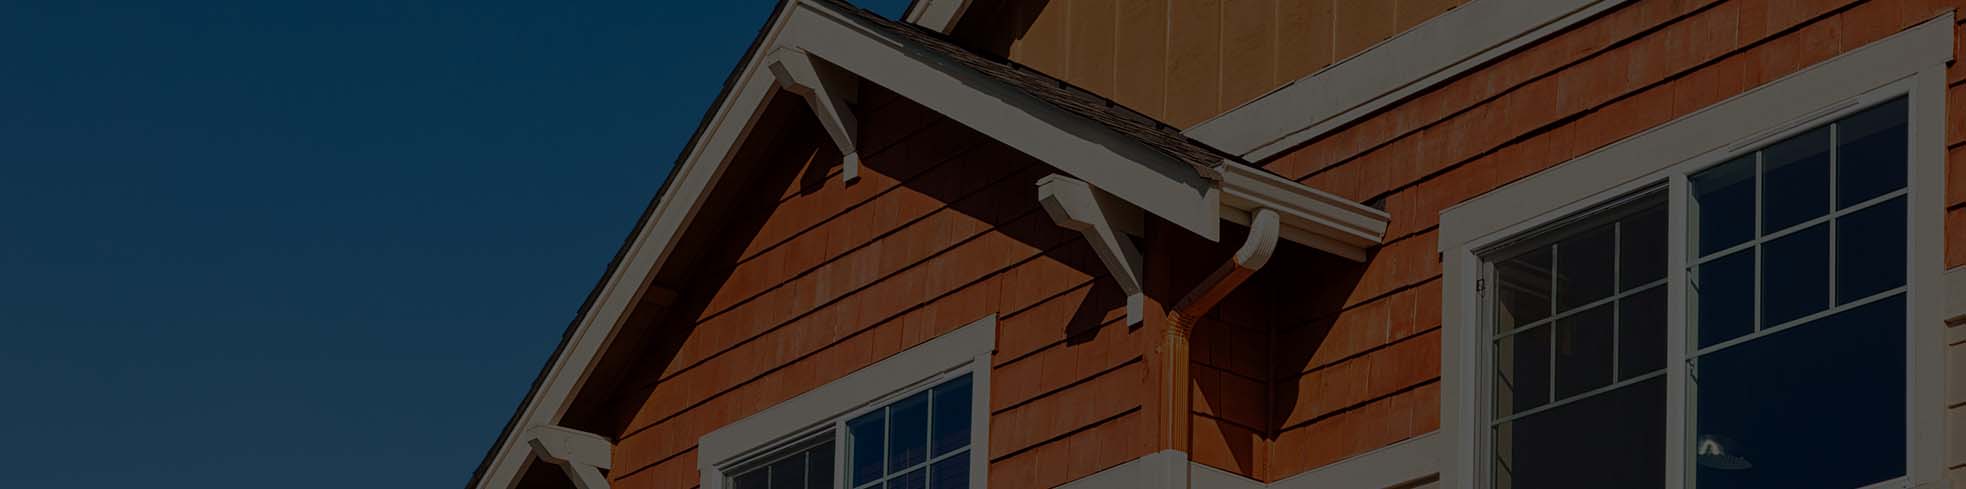 Eave repair & installation for Milwaukee Residents